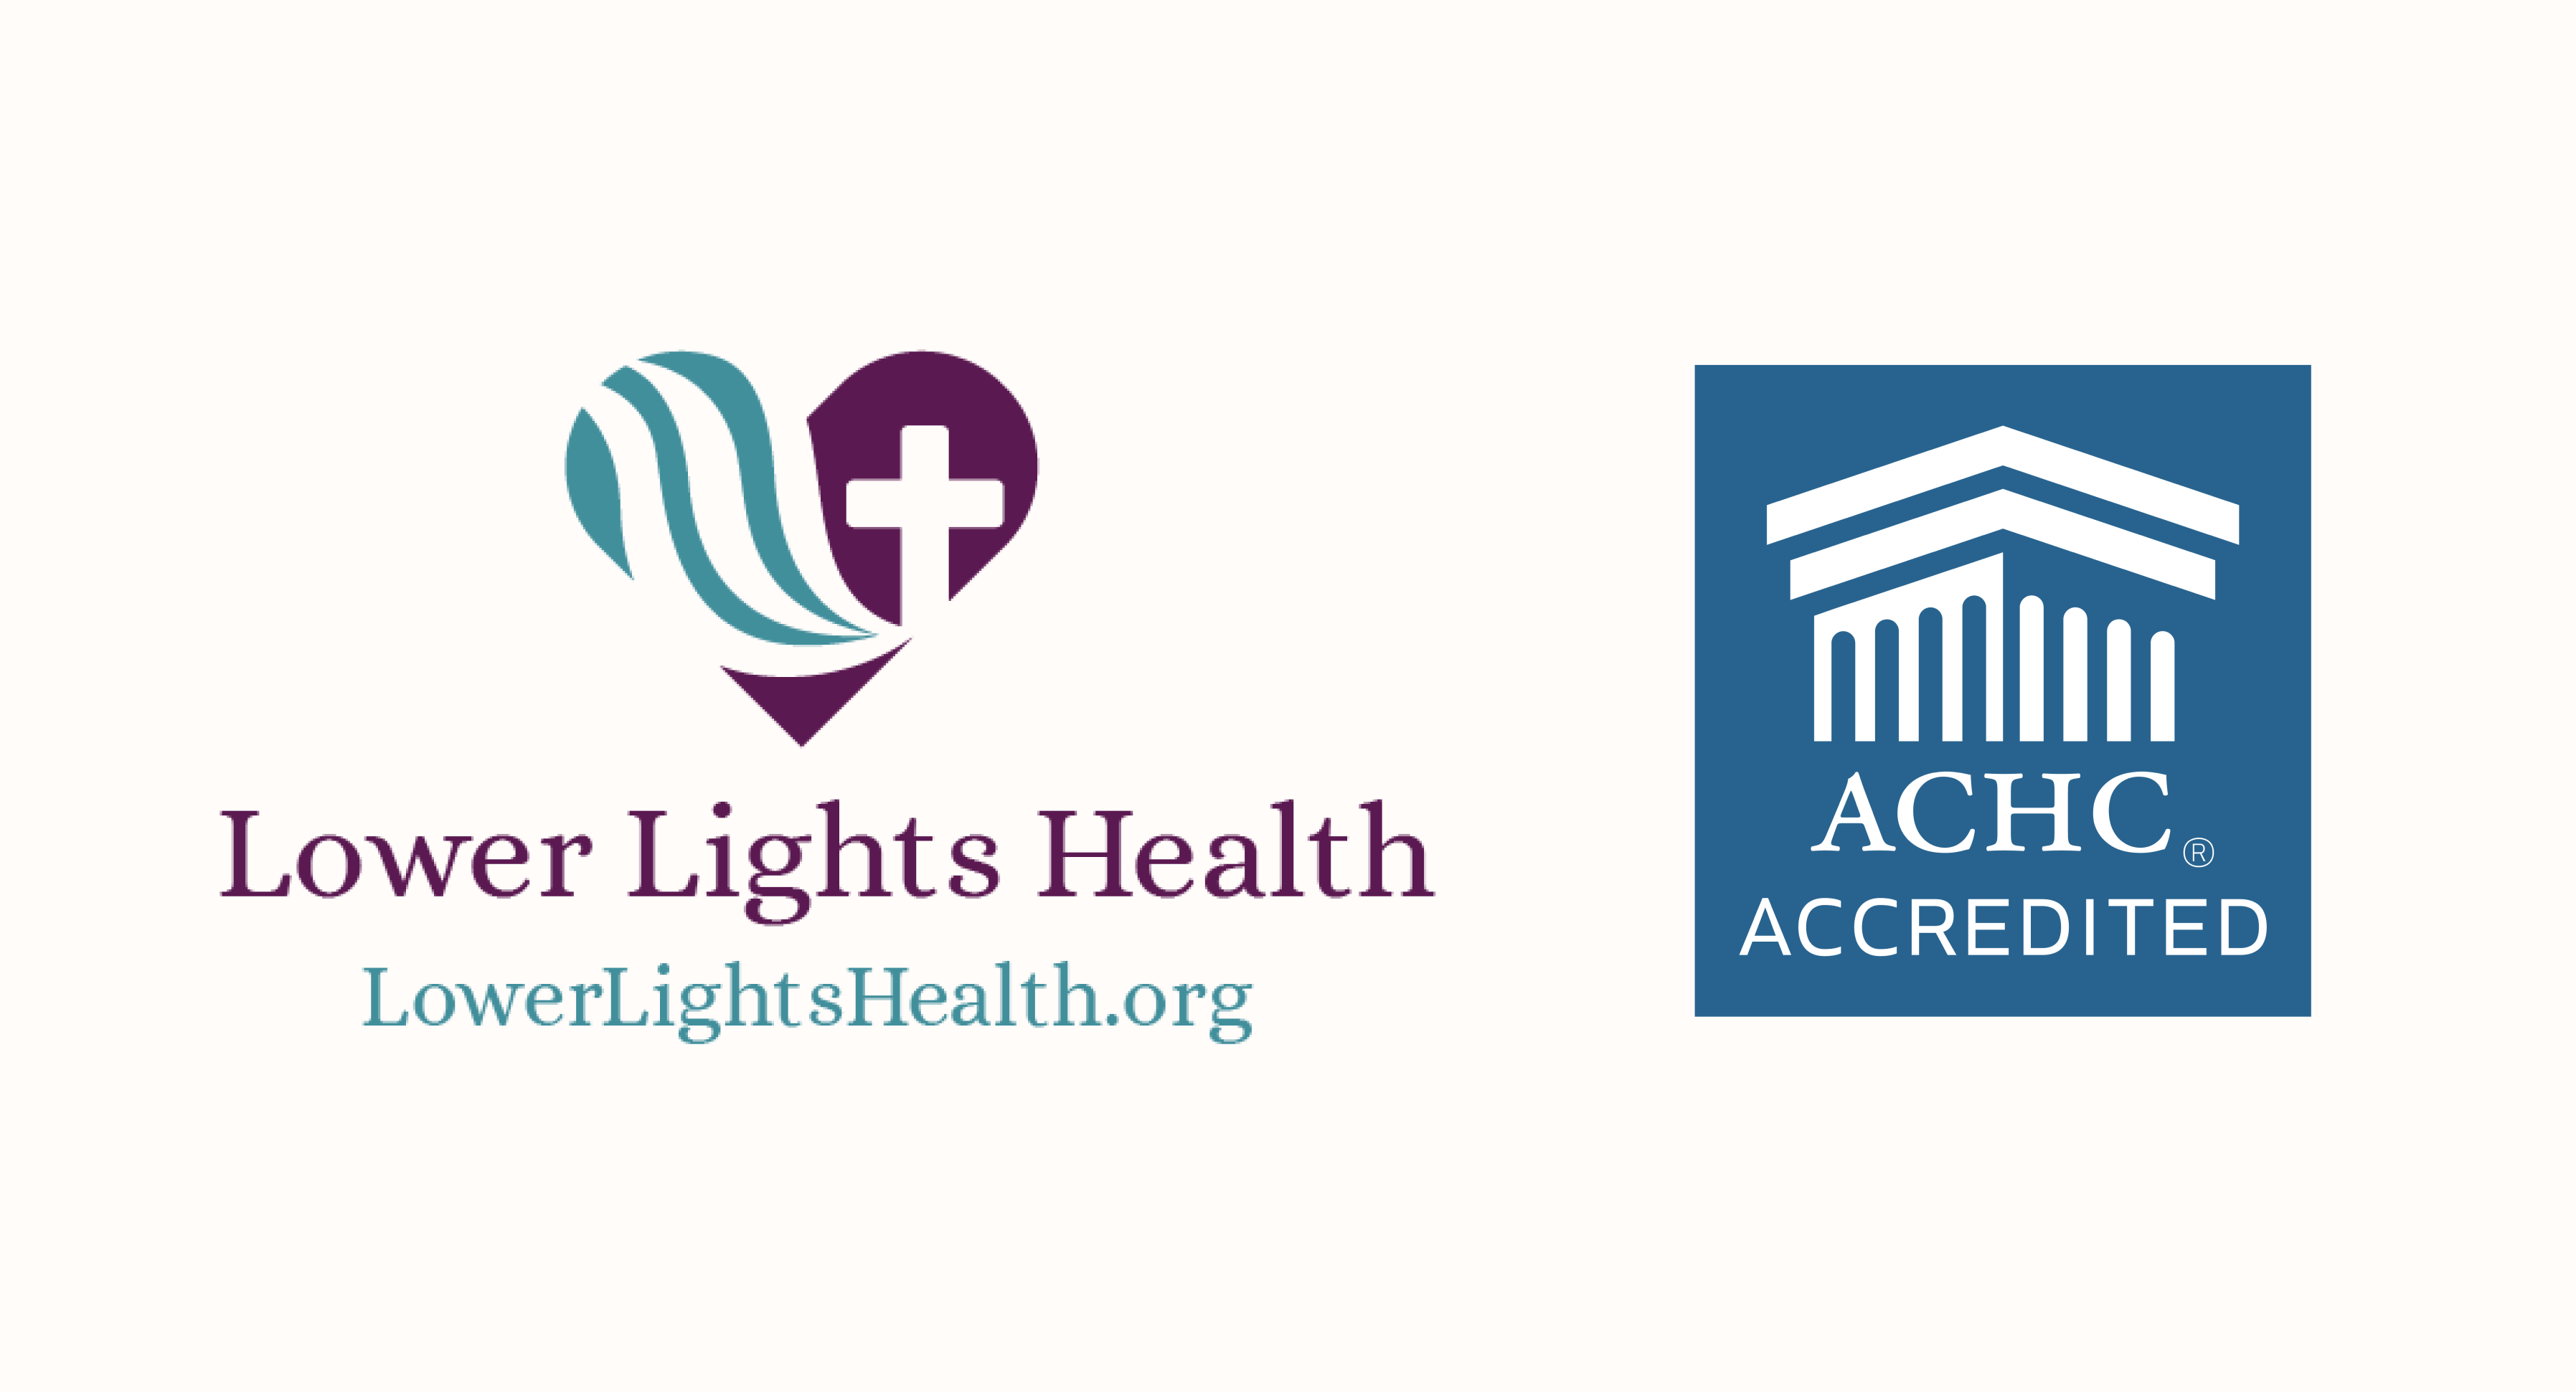 Lower Lights CHC Specialty Pharmacy Services Achieves ACHC Accreditation